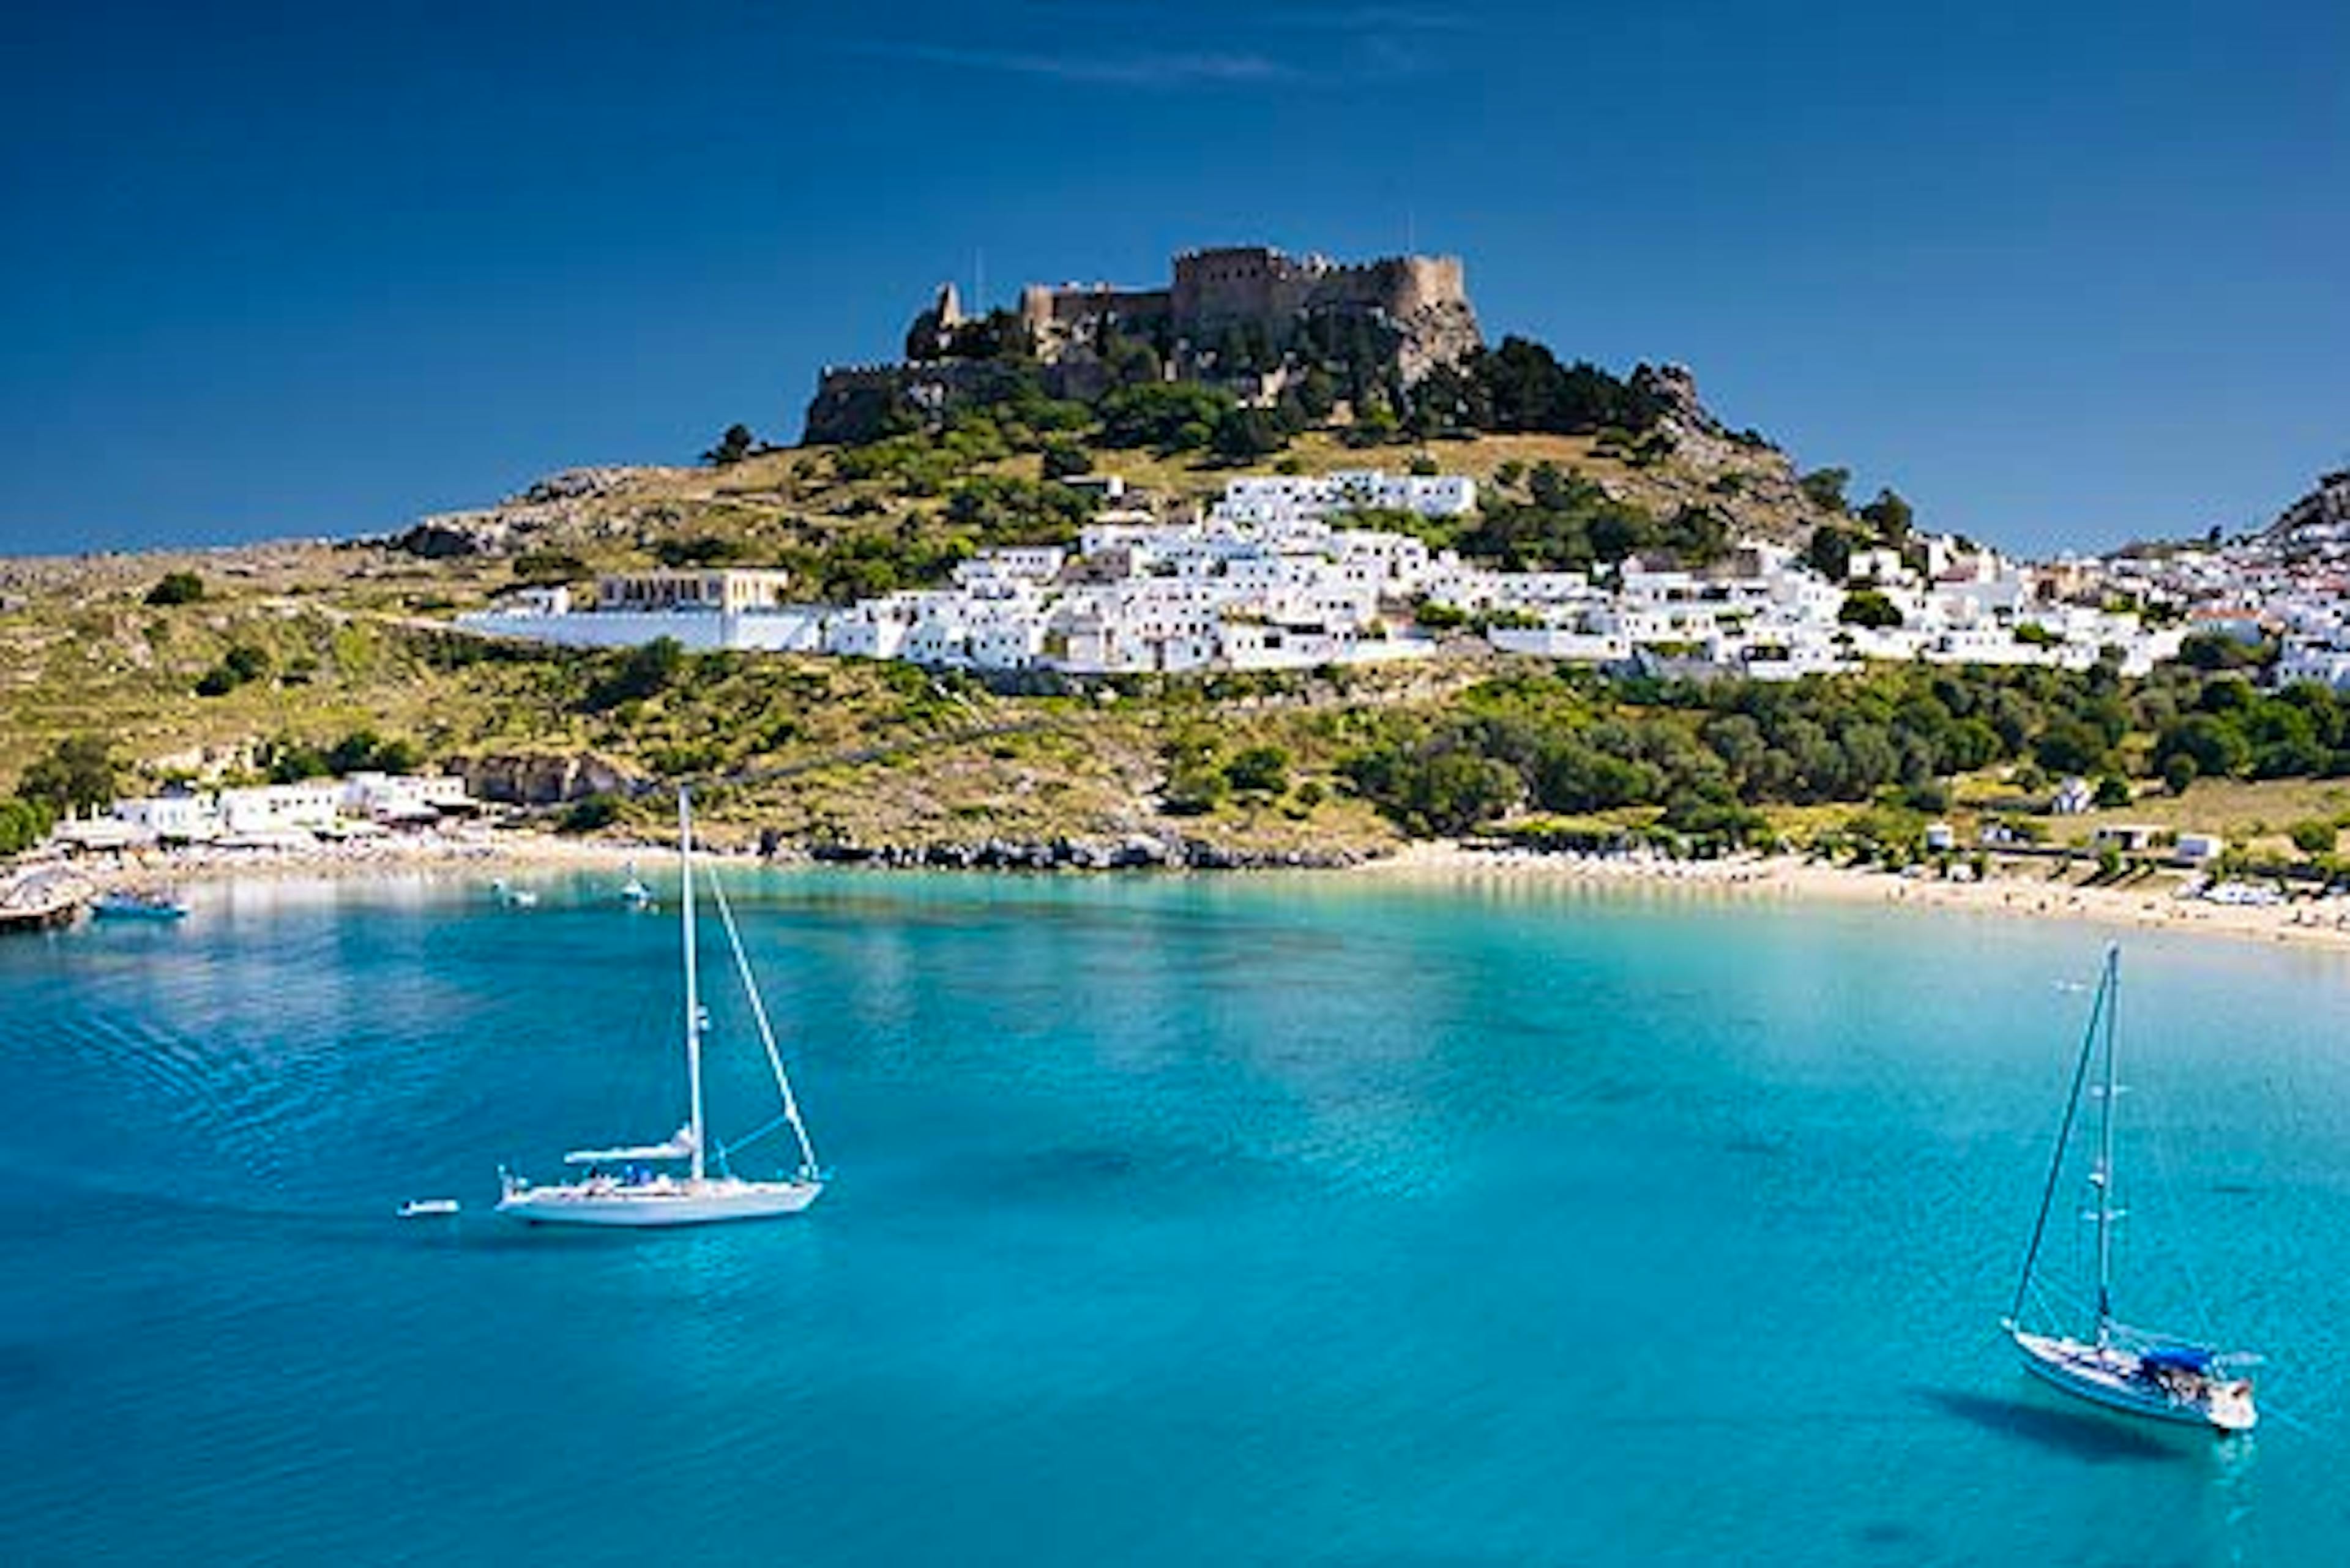 Charter a sailboat in Rhodes: Enjoy the day. Live the night